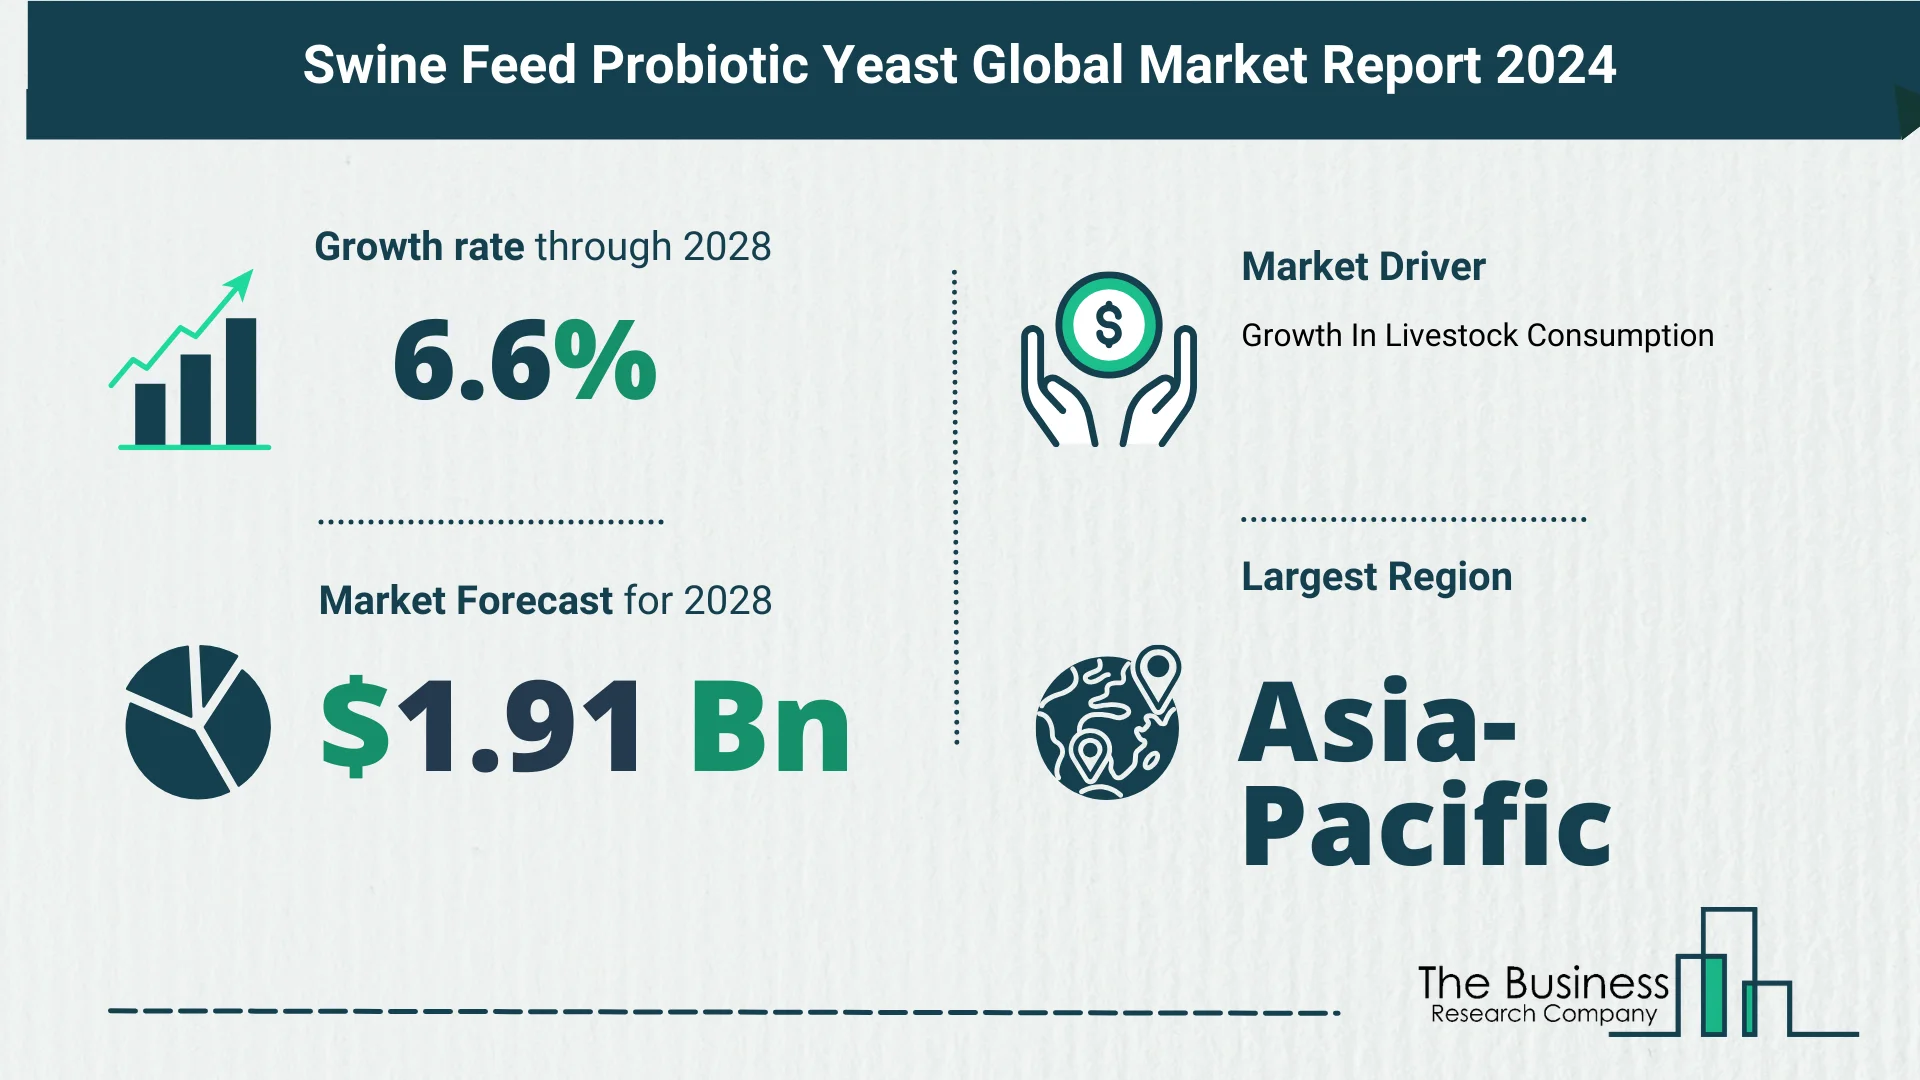 How Is The Swine Feed Probiotic Yeast Market Expected To Grow Through 2024-2033